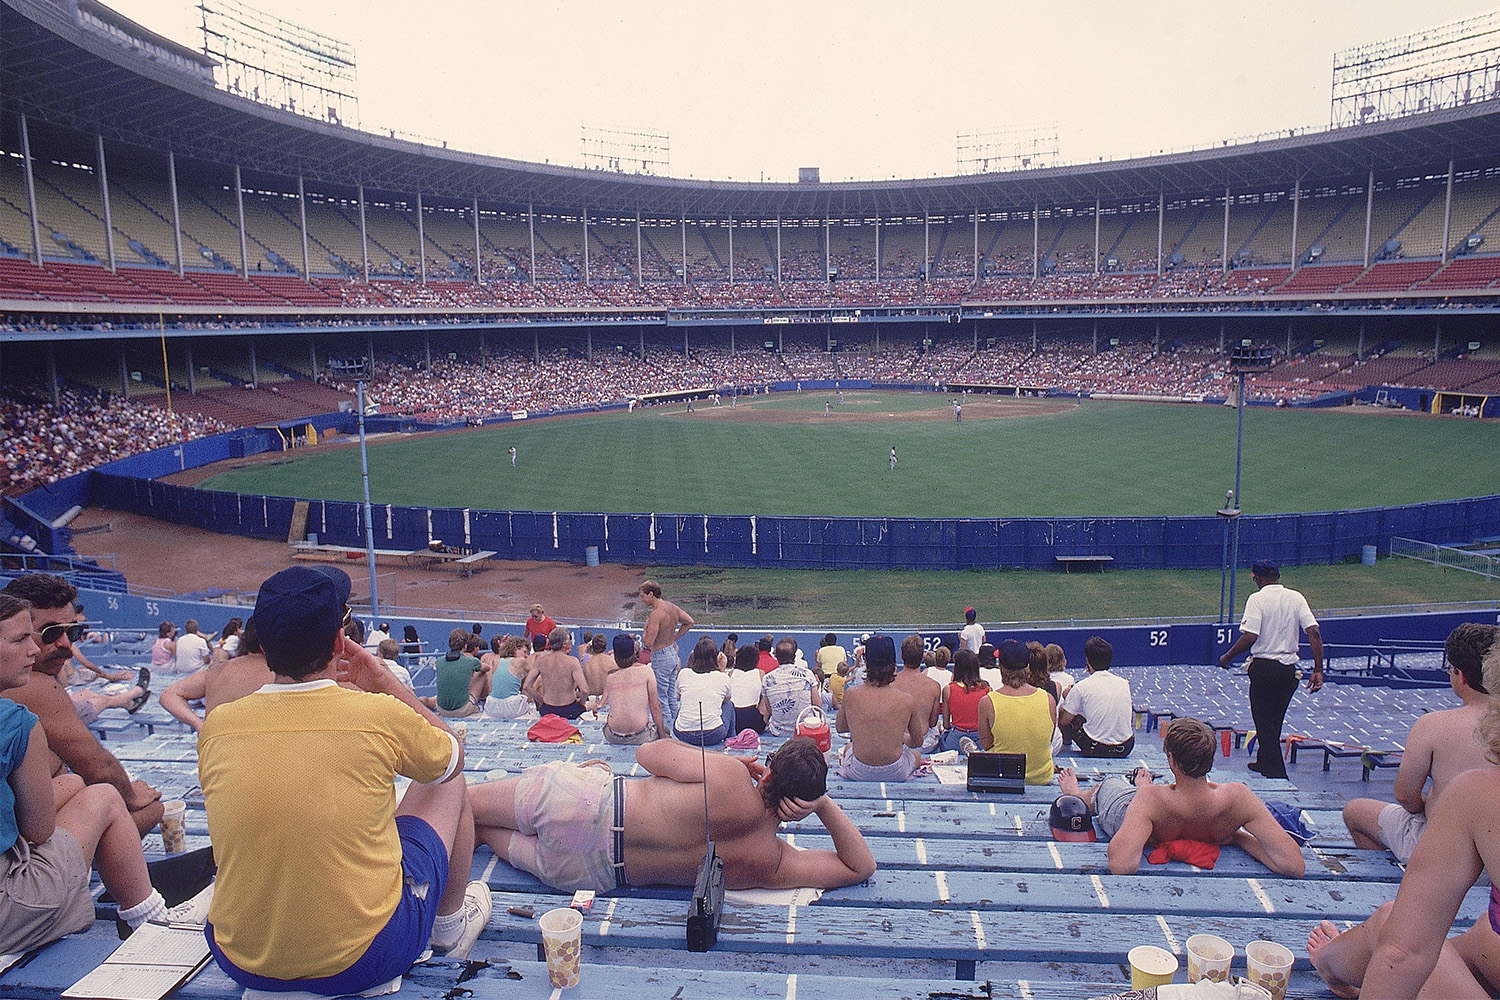 Fans lounging around a somewhat empty bleachers section at a baseball game.